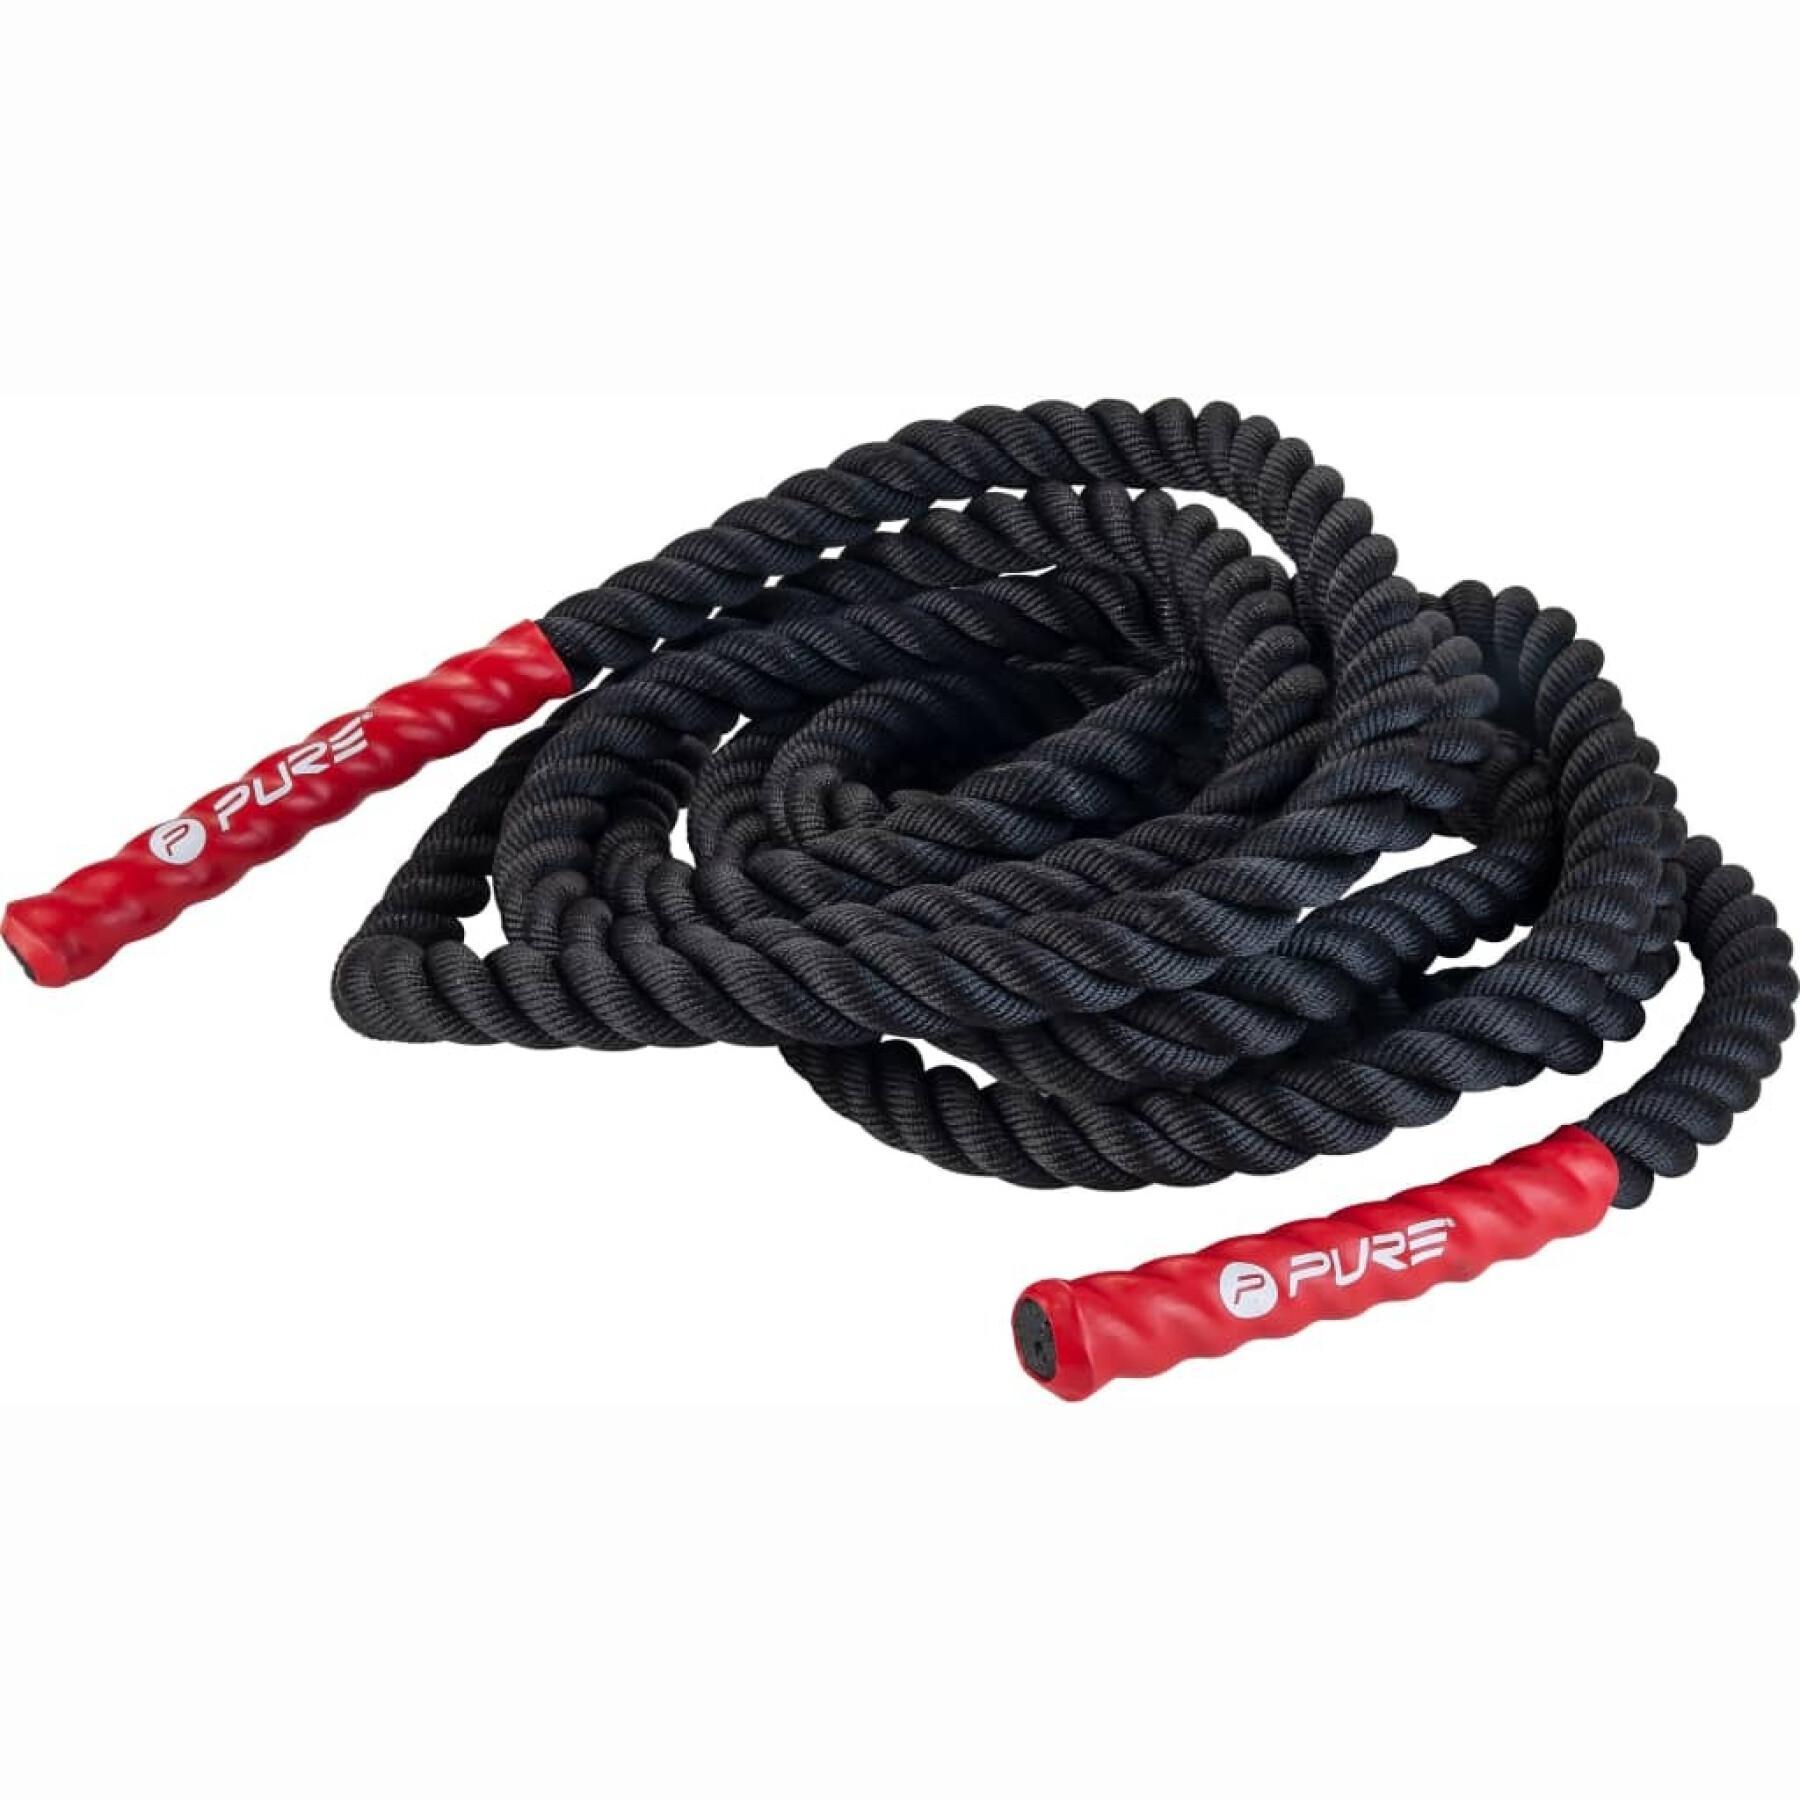 Wave rope Pure2Improve 12m - Wave strings - Crossfit - Physical